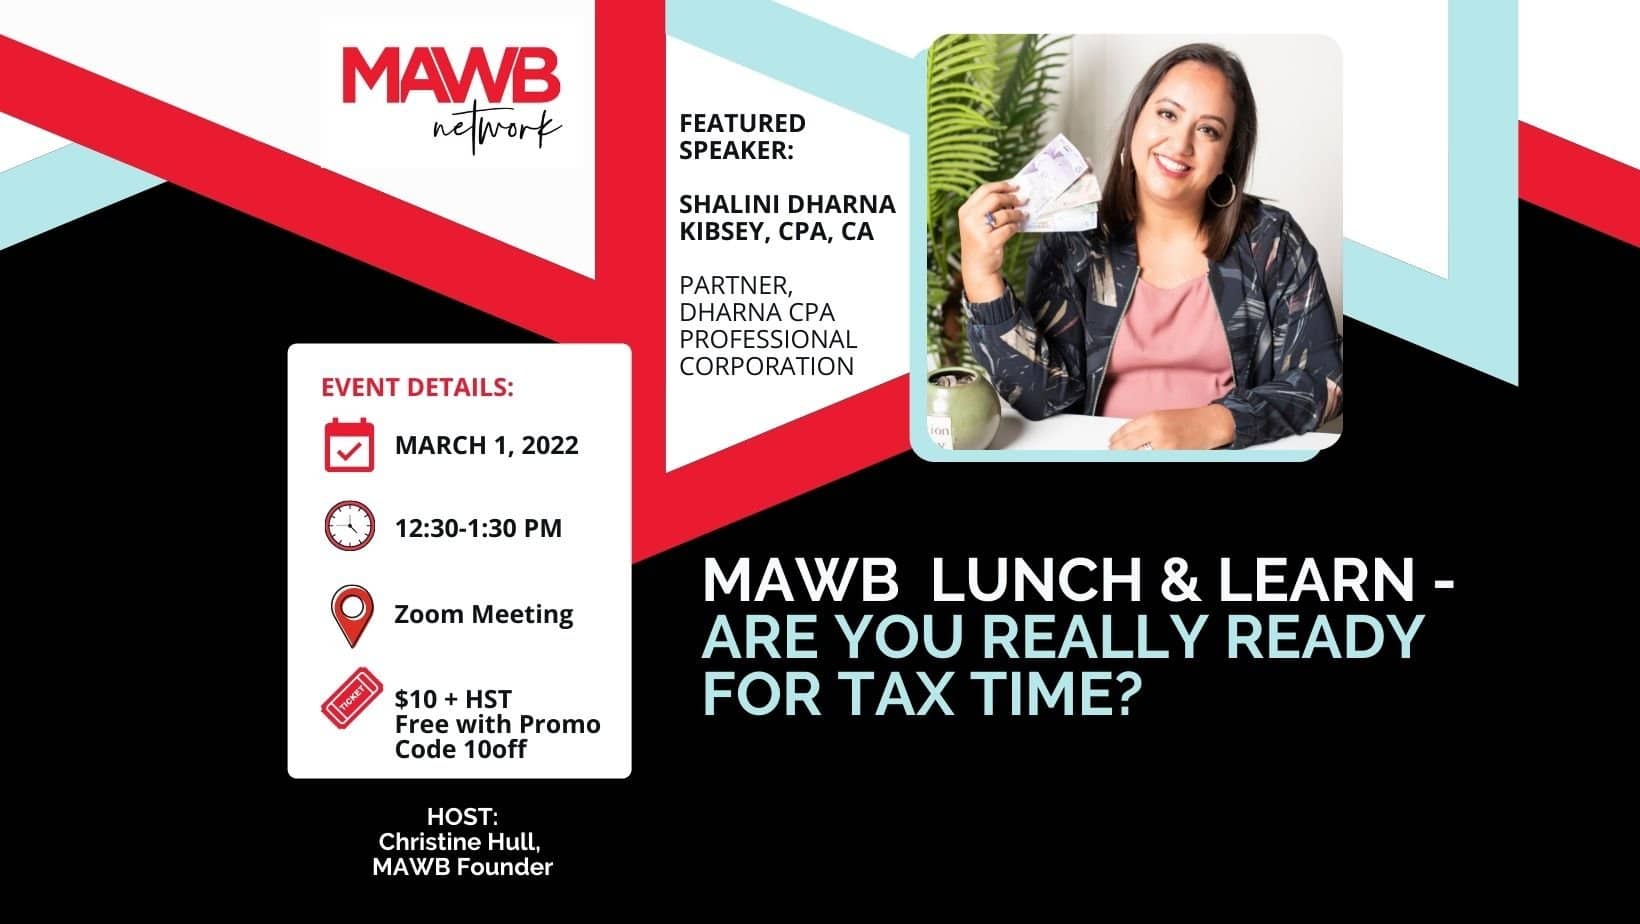 MAWB Lunch & Learn - Are you really ready for tax time?